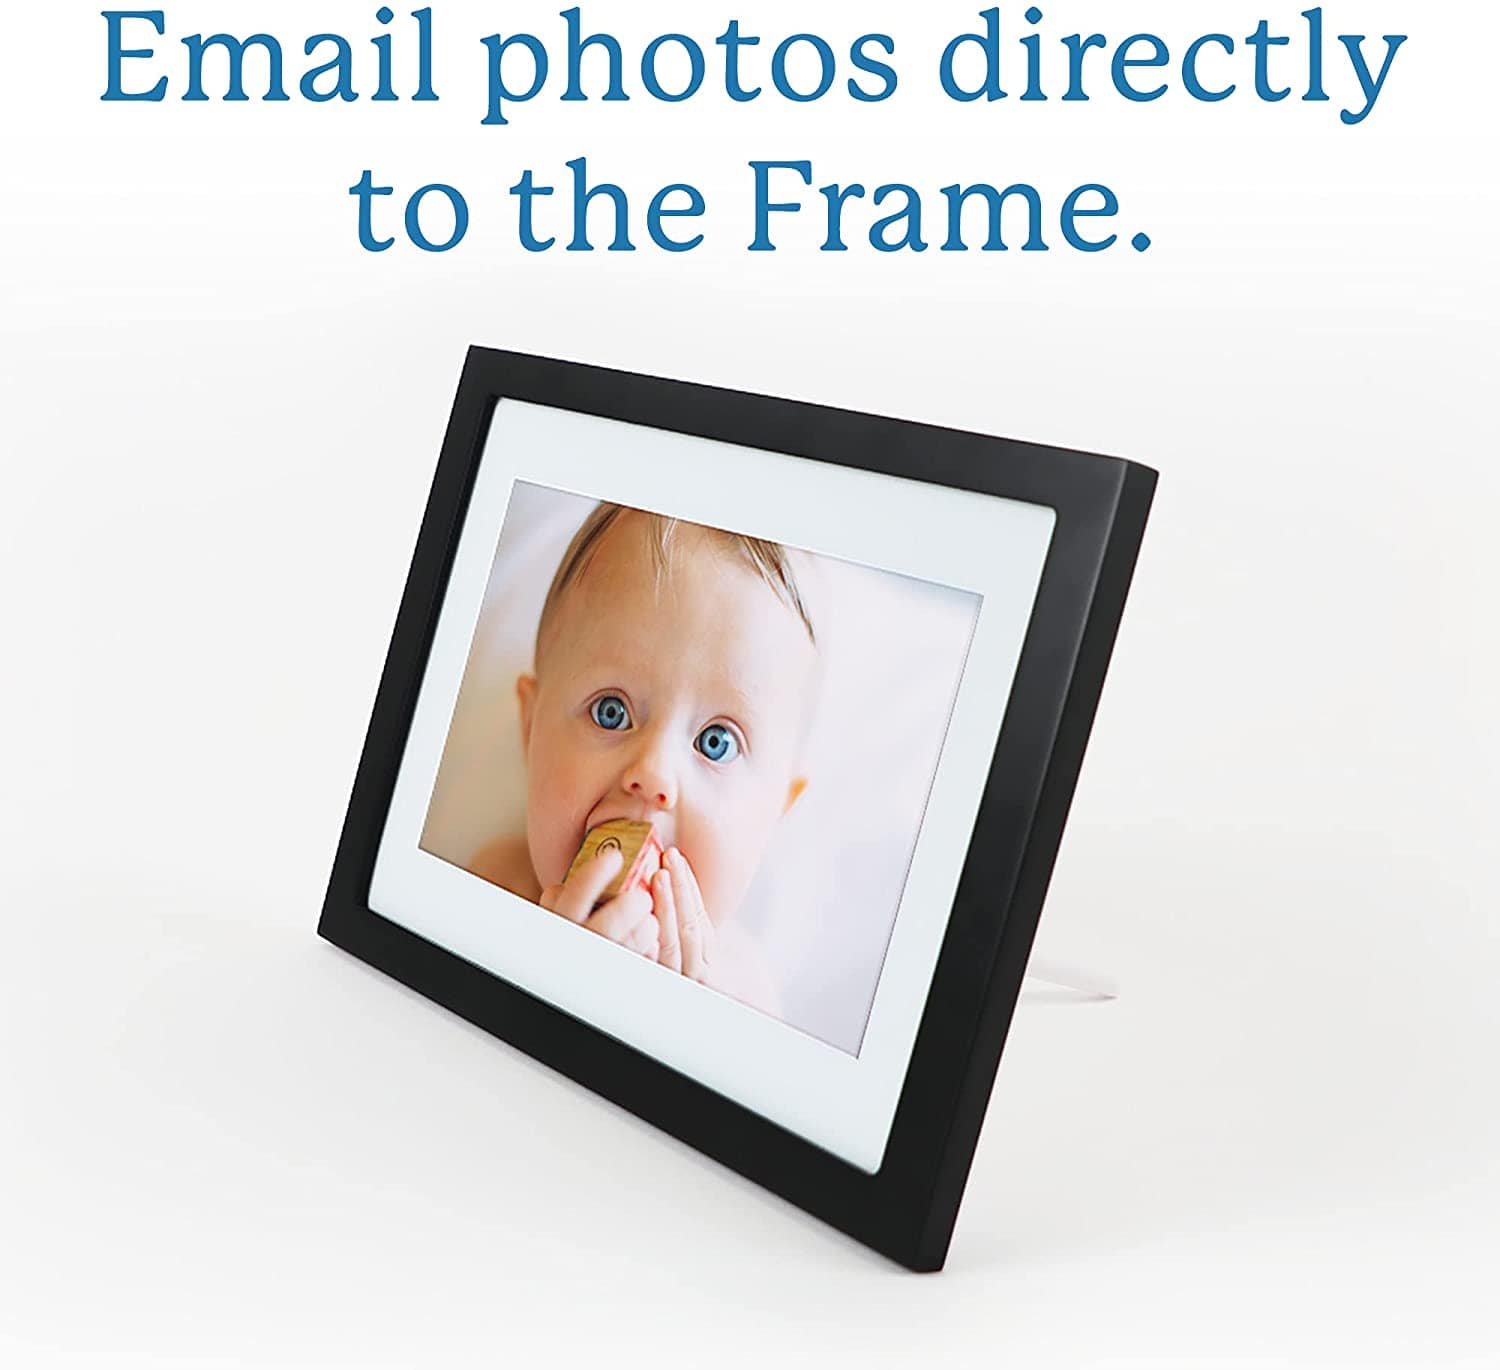 Skylight Frame - 10 Inch Wifi Digital Picture Frame, Email Photos From Anywhere, Touch Screen Display - Smart Tech Shopping